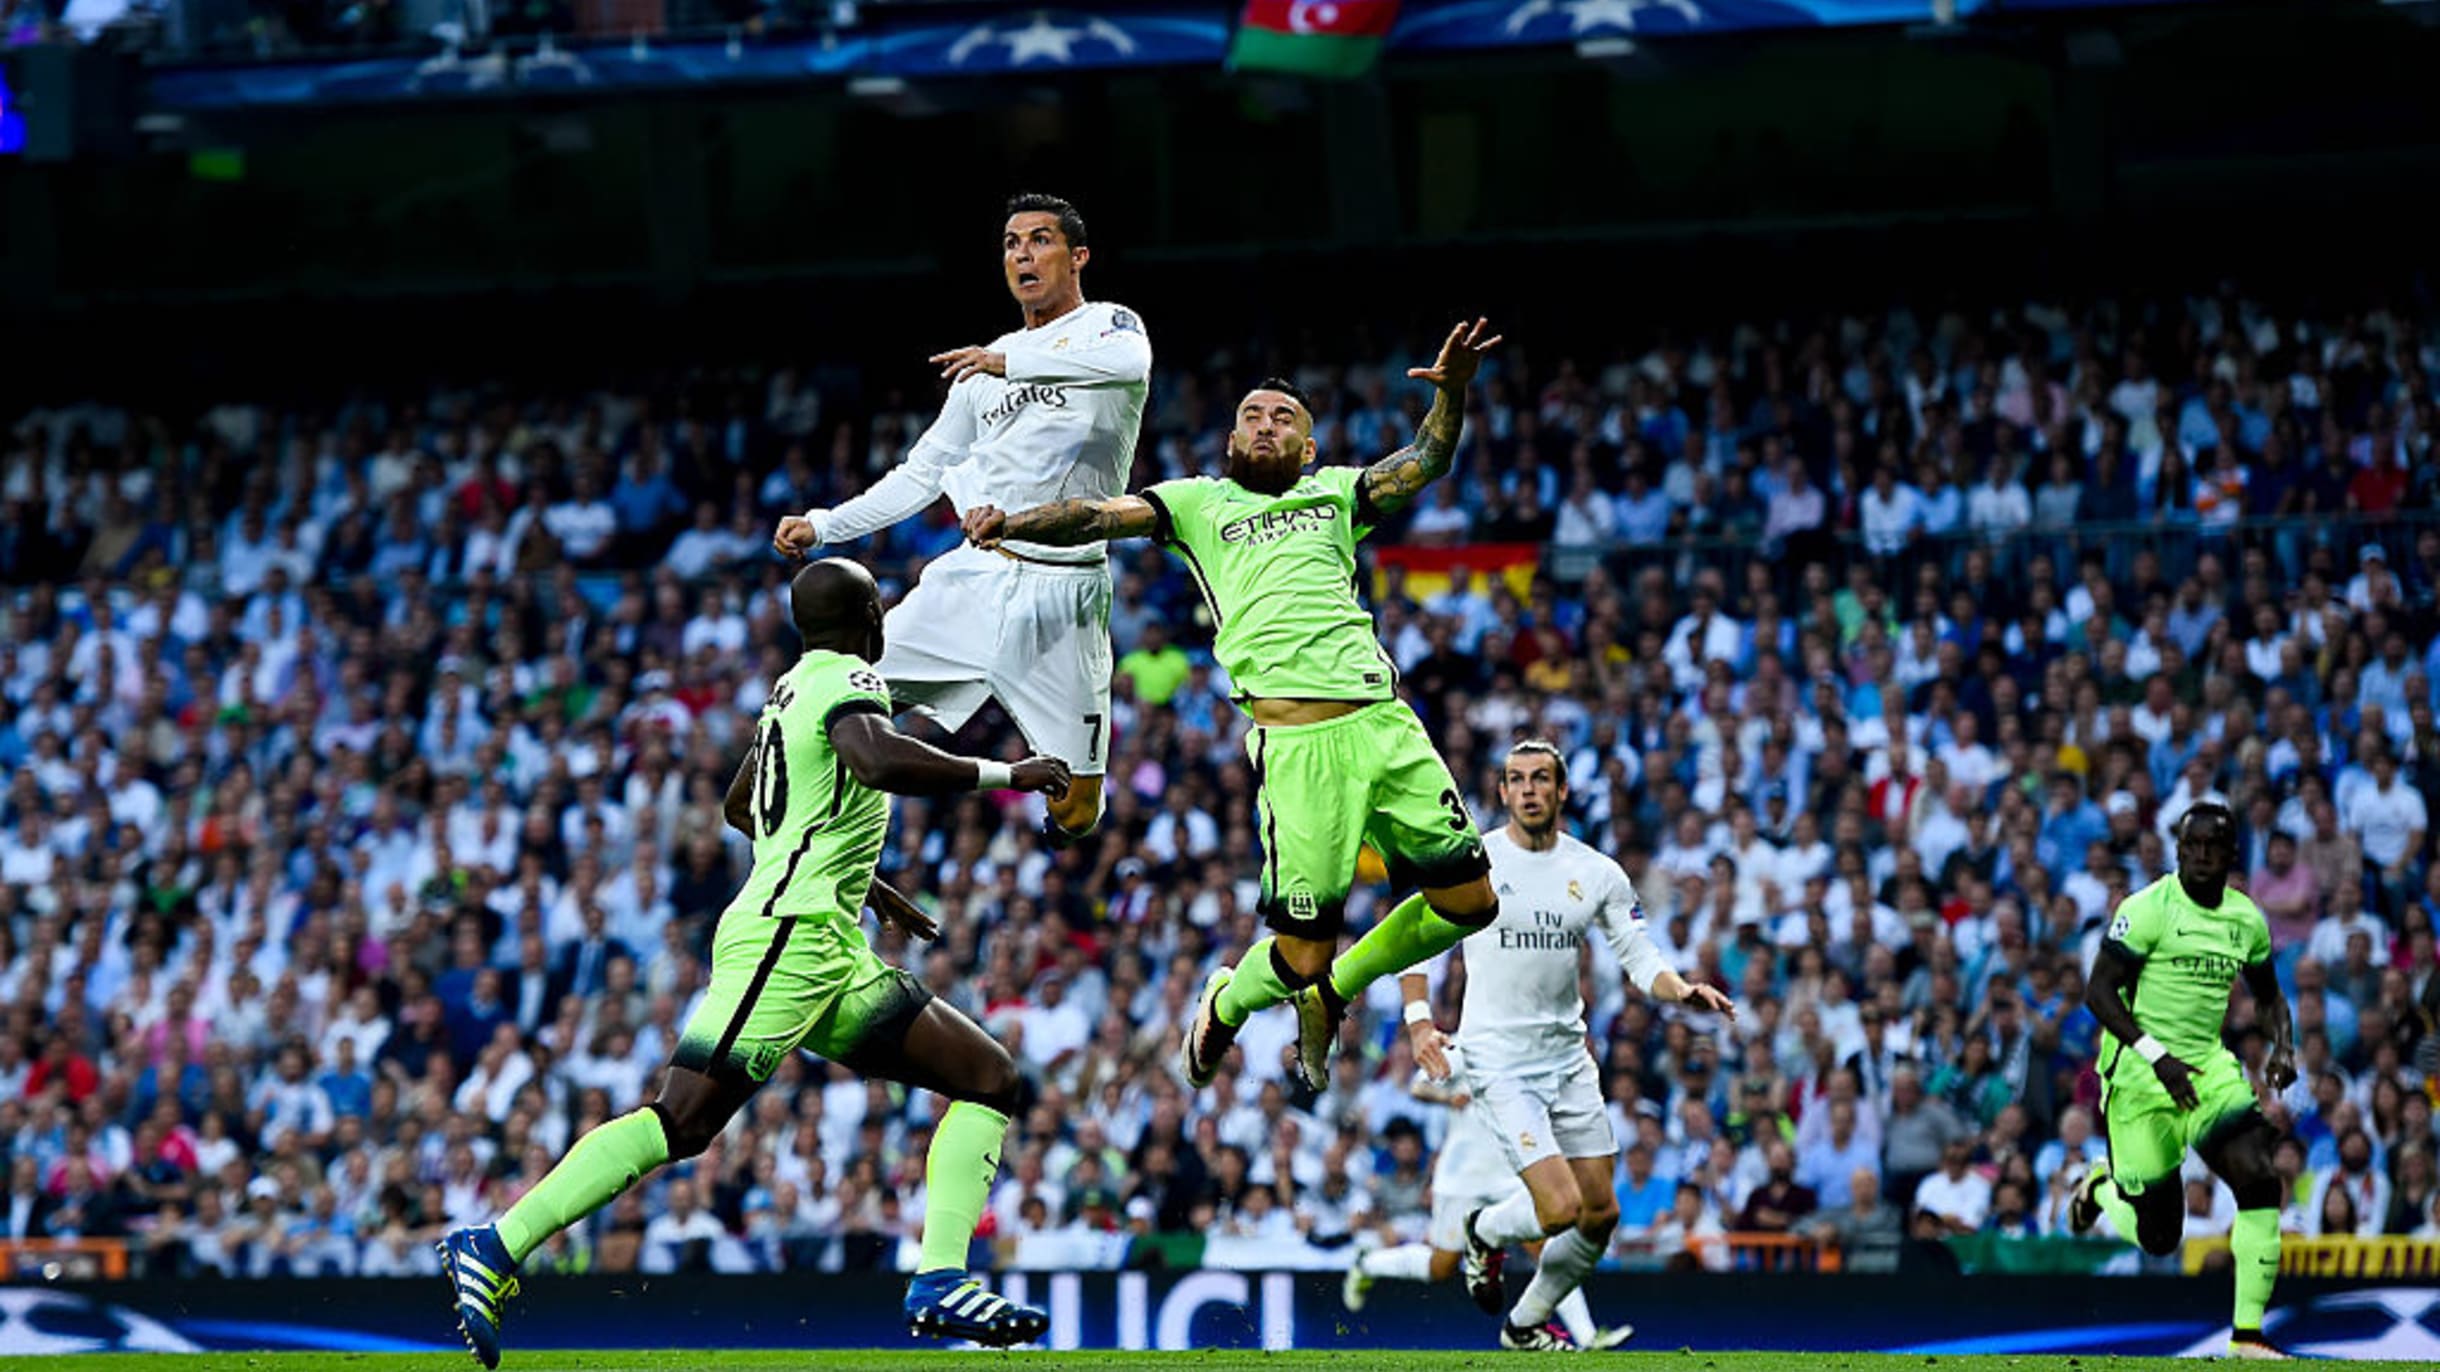 Cristiano Ronaldo highest jump Know the height and more